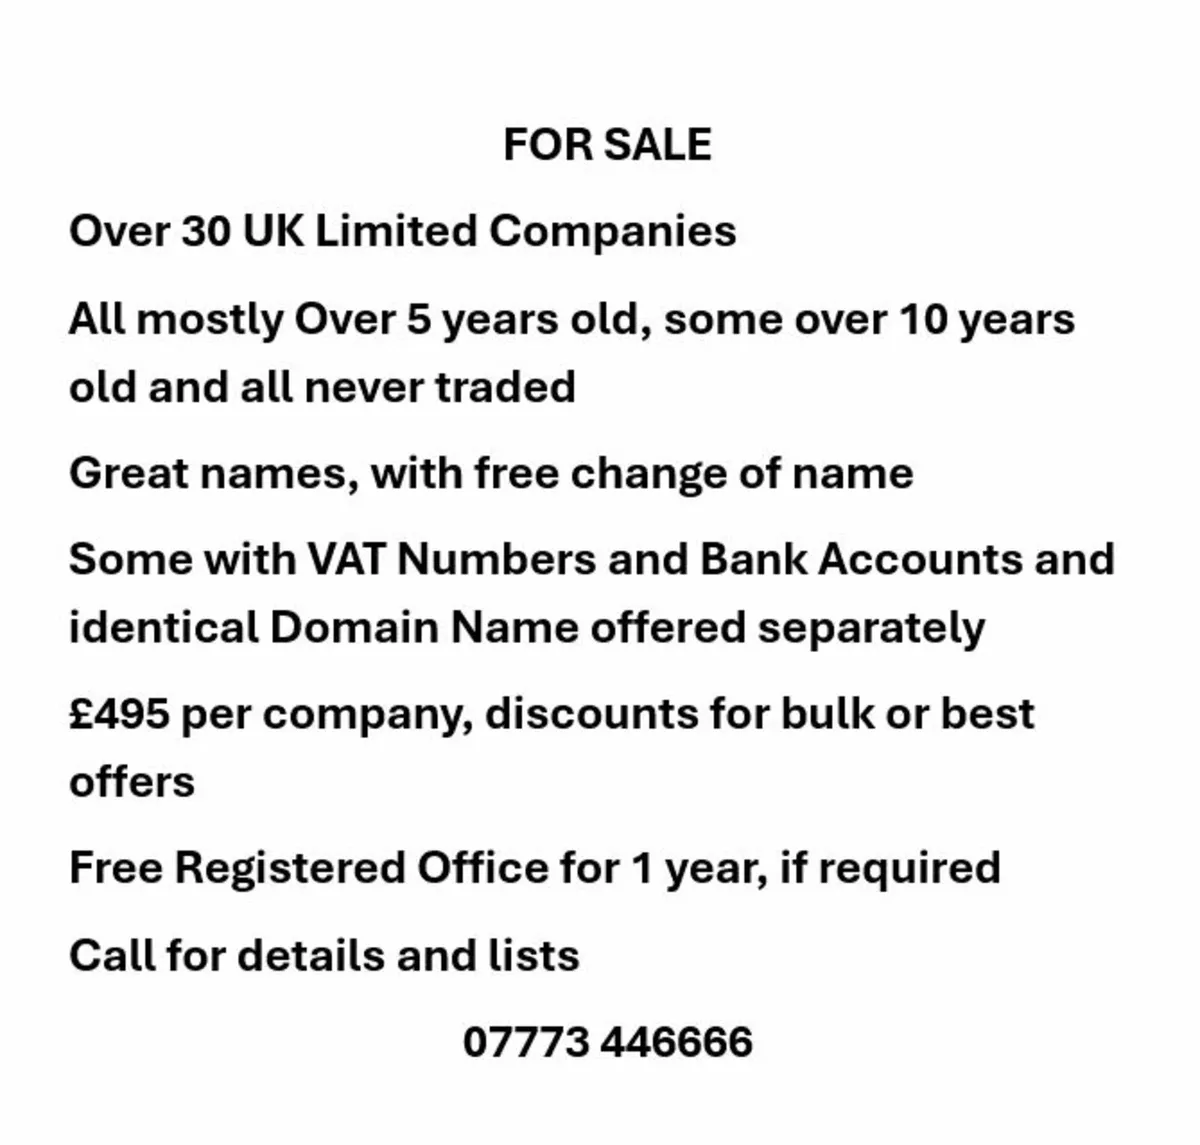 UK Limited Companies For Sale,  Over 5 years old